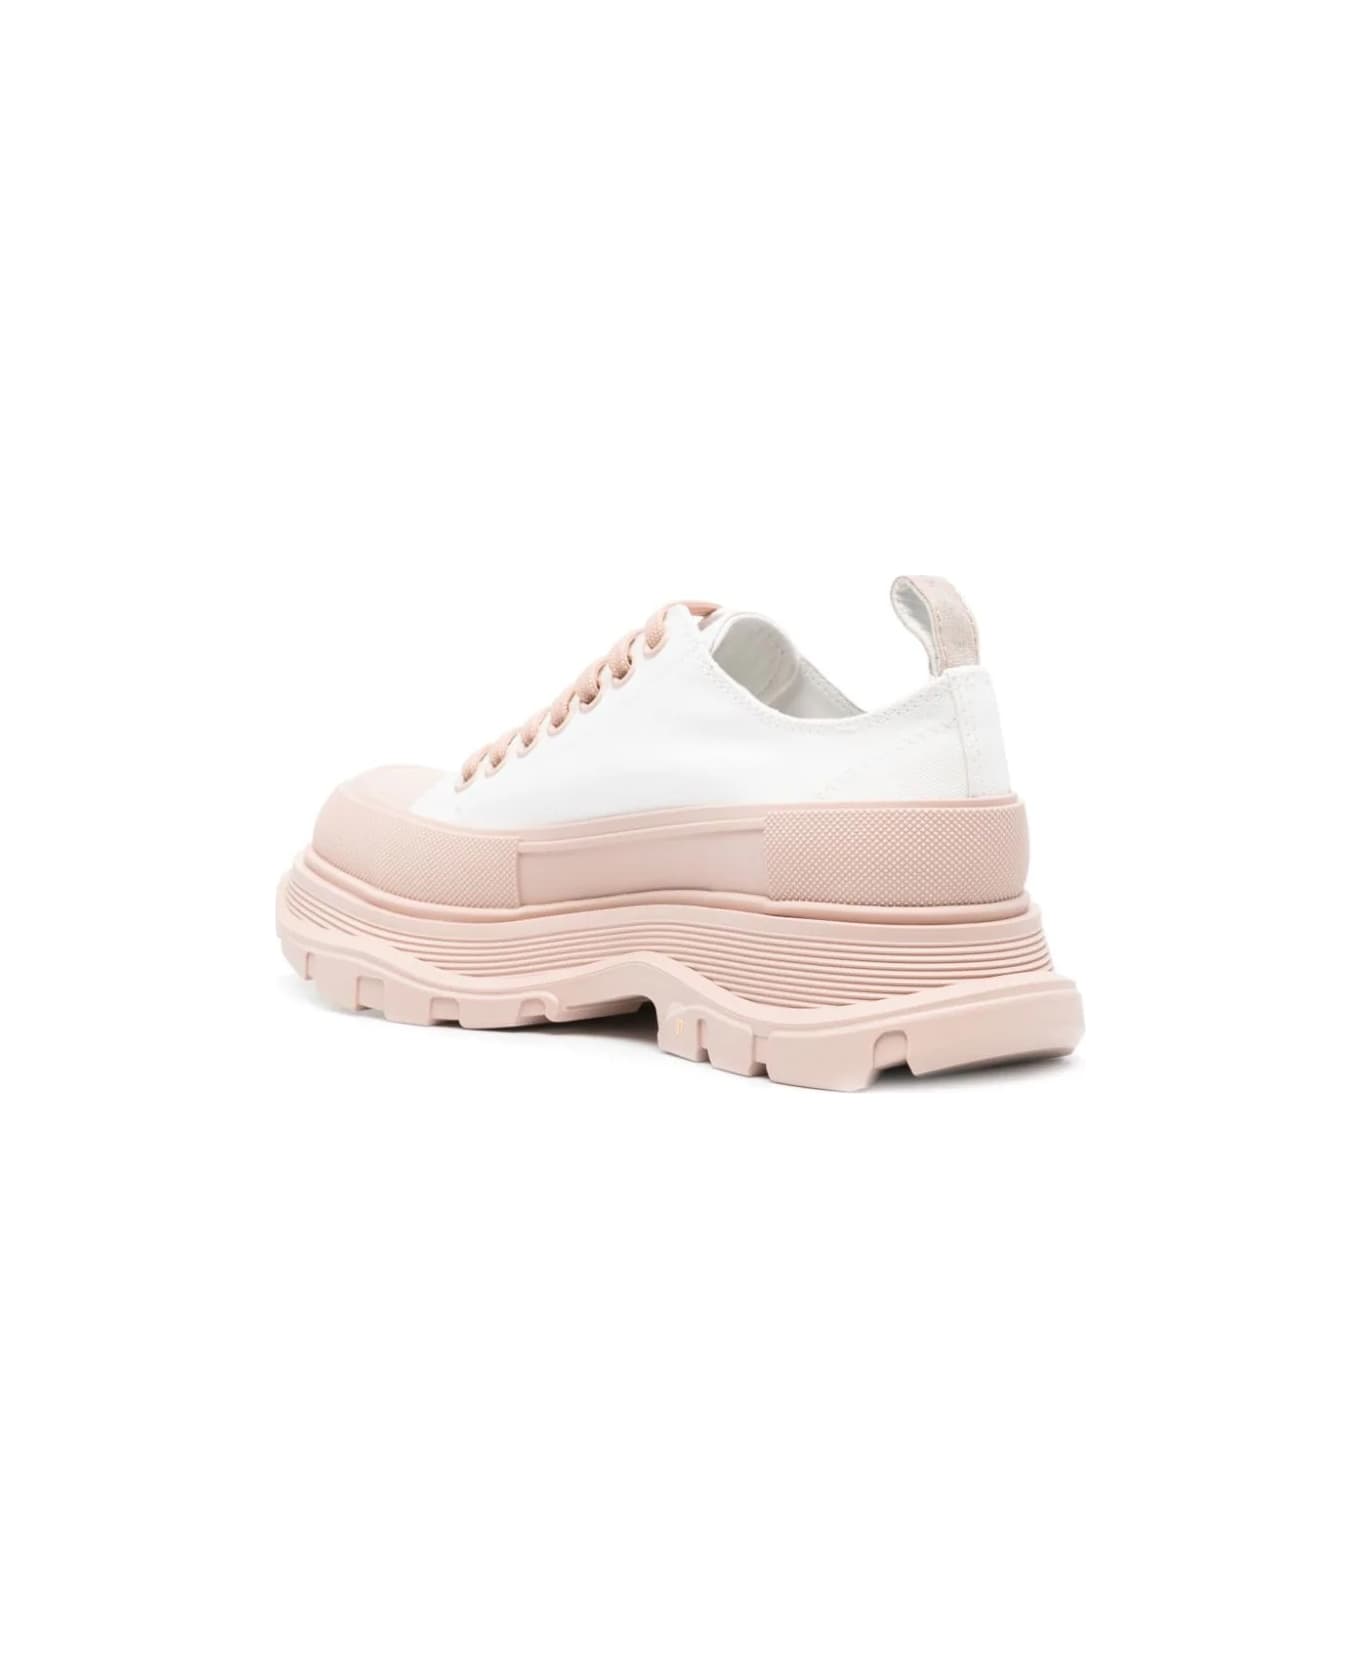 Alexander McQueen White And Pink Tread Slick Sneakers - Pink